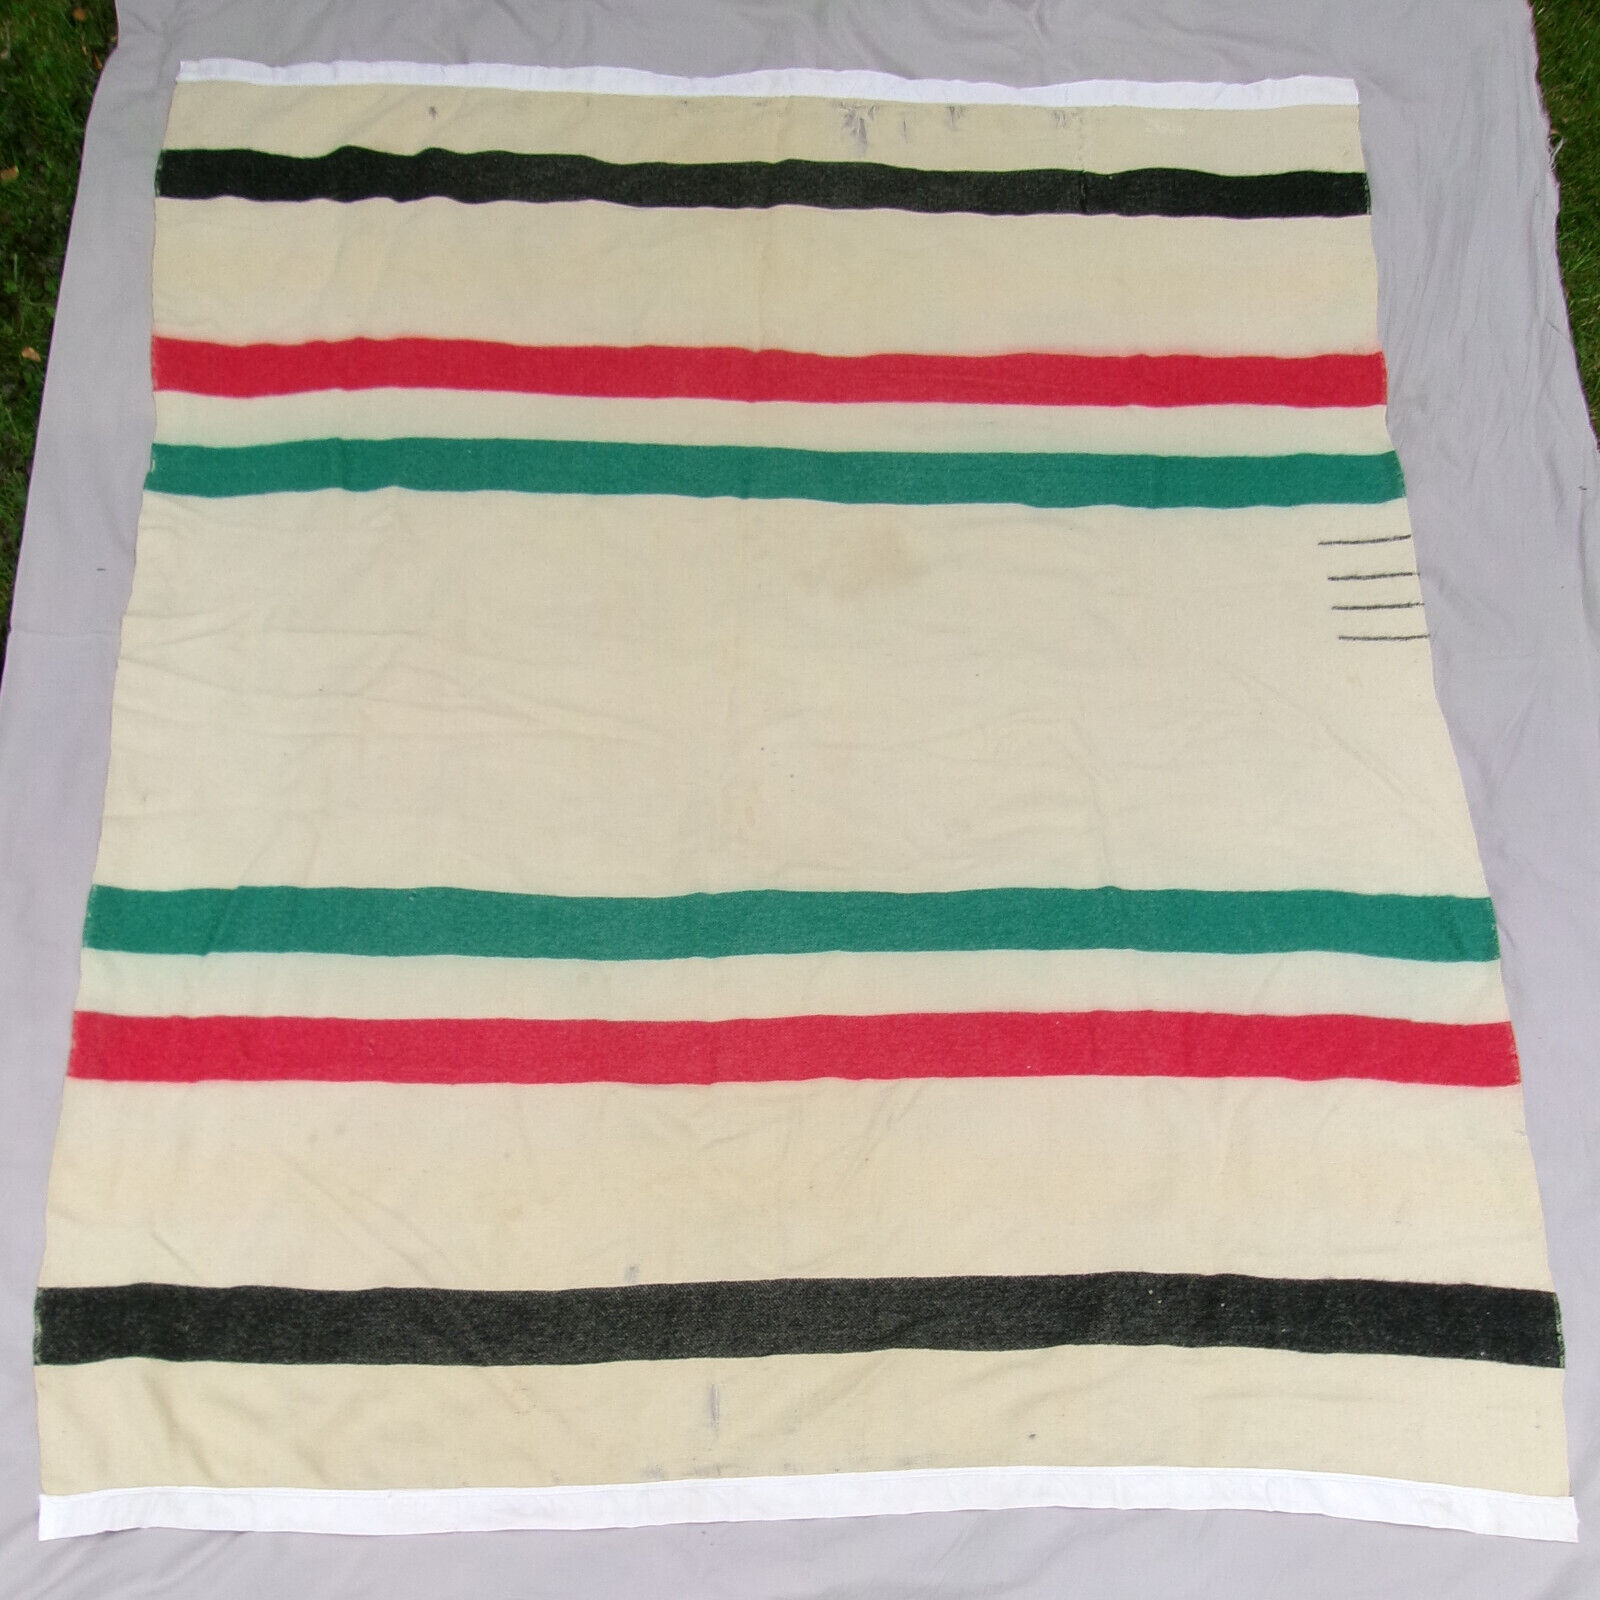 VTG HUDSON BAY 4 POINT WOOL BLANKET 84X68 AS IS DISTRESS FOR FABRIC COAT JACKET